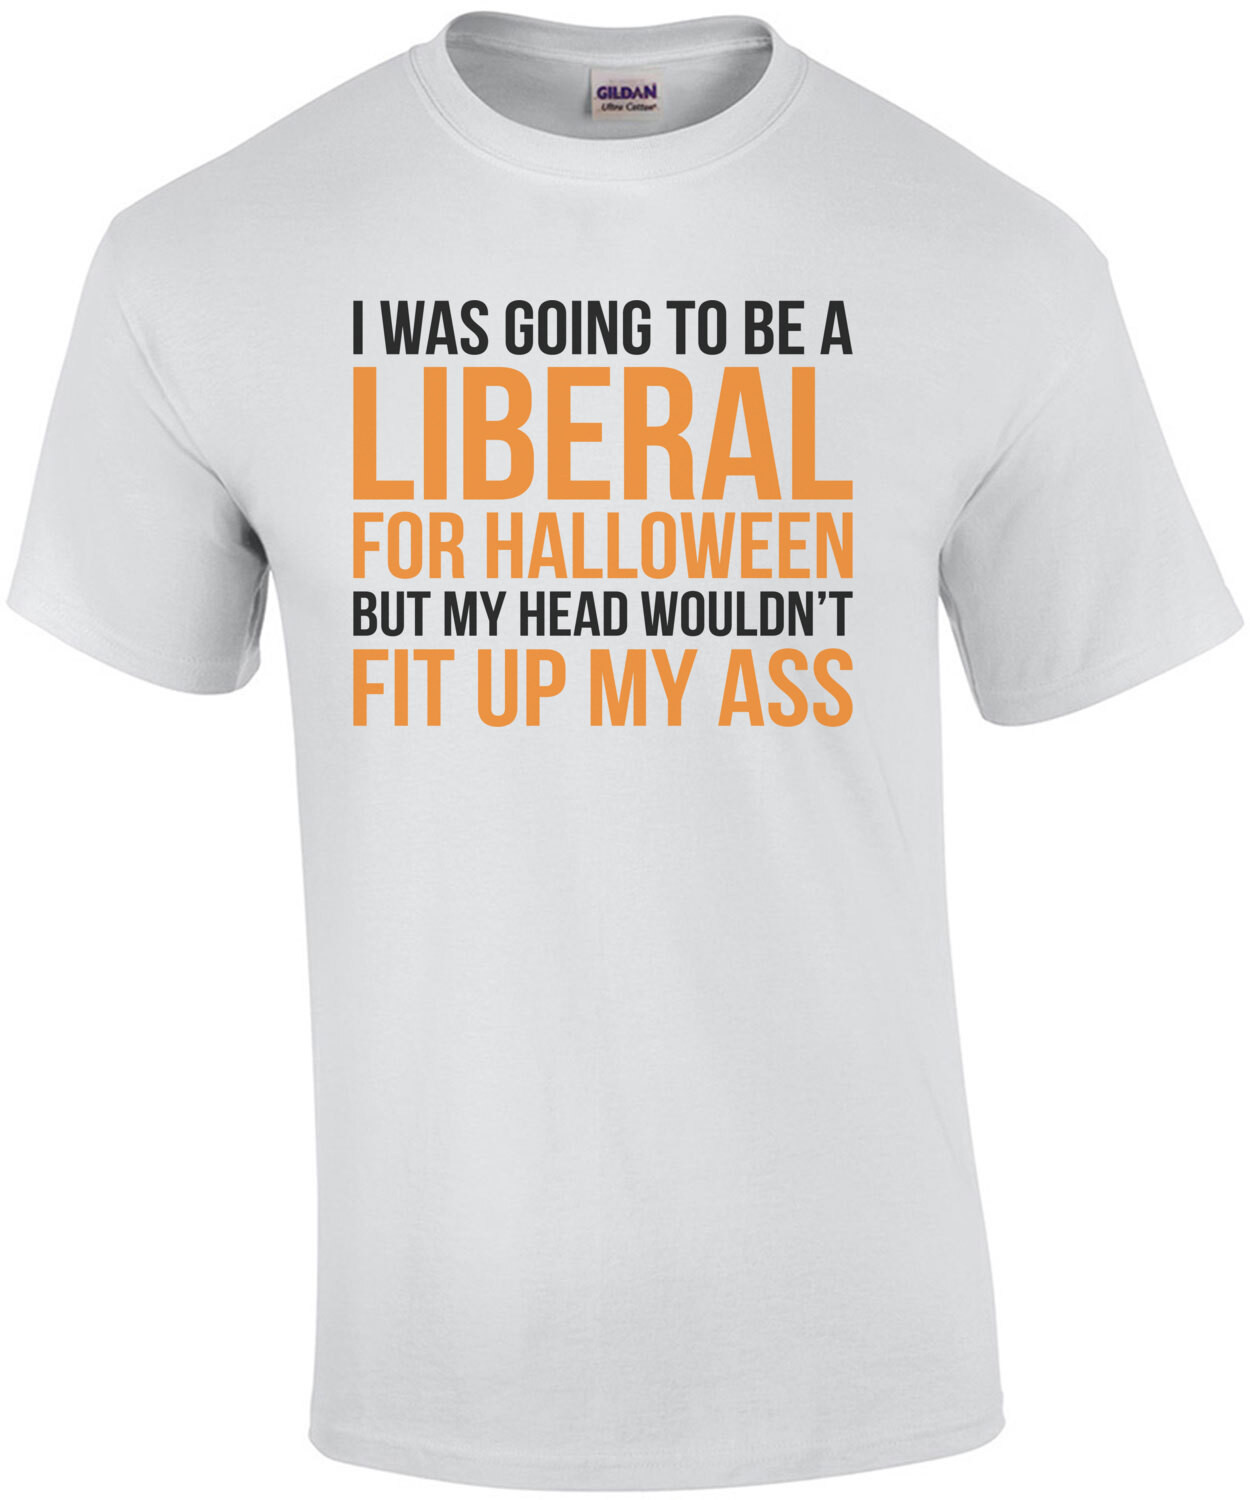 I was going to be a liberal for halloween but my head wouldn't fit up my ass. Funny political Halloween t-shirt